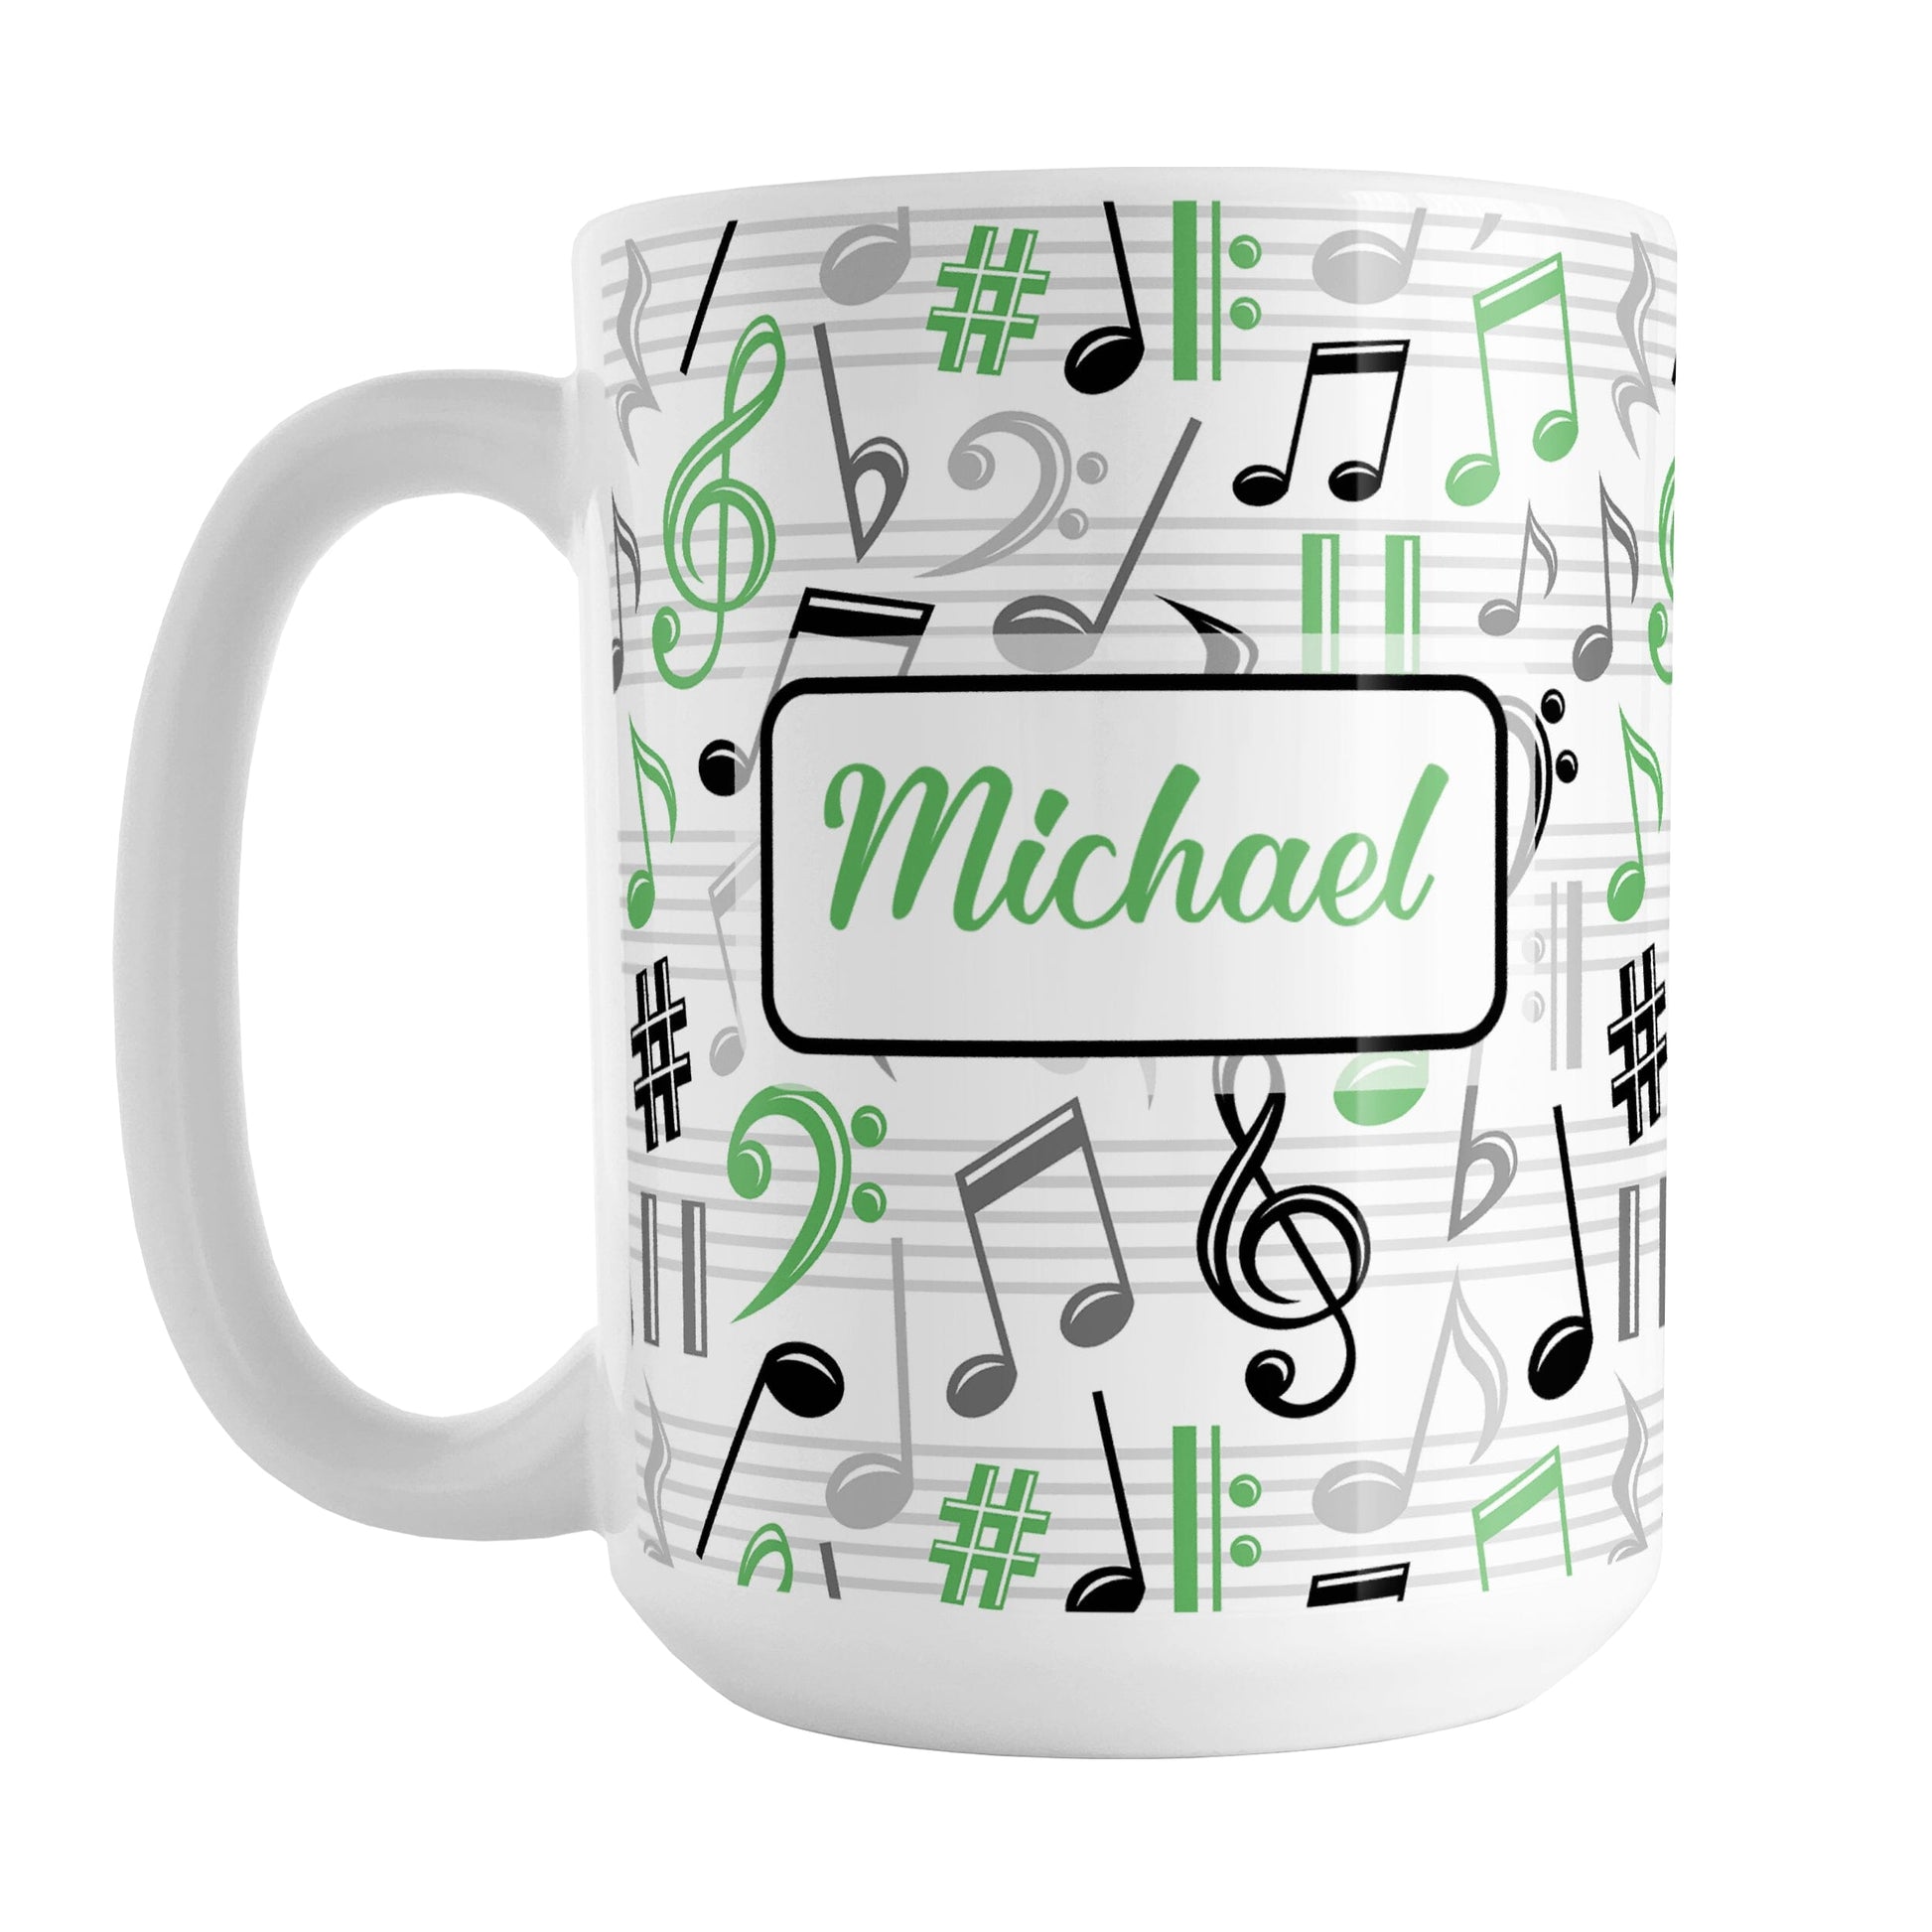 Personalized Green Music Notes Pattern Mug (15oz) at Amy's Coffee Mugs. A ceramic coffee mug designed with music notes and symbols in green, black, and gray in a pattern that wraps around the mug to the handle. Your personalized name is custom printed in a green script font on white over the music pattern design on both sides of the mug.